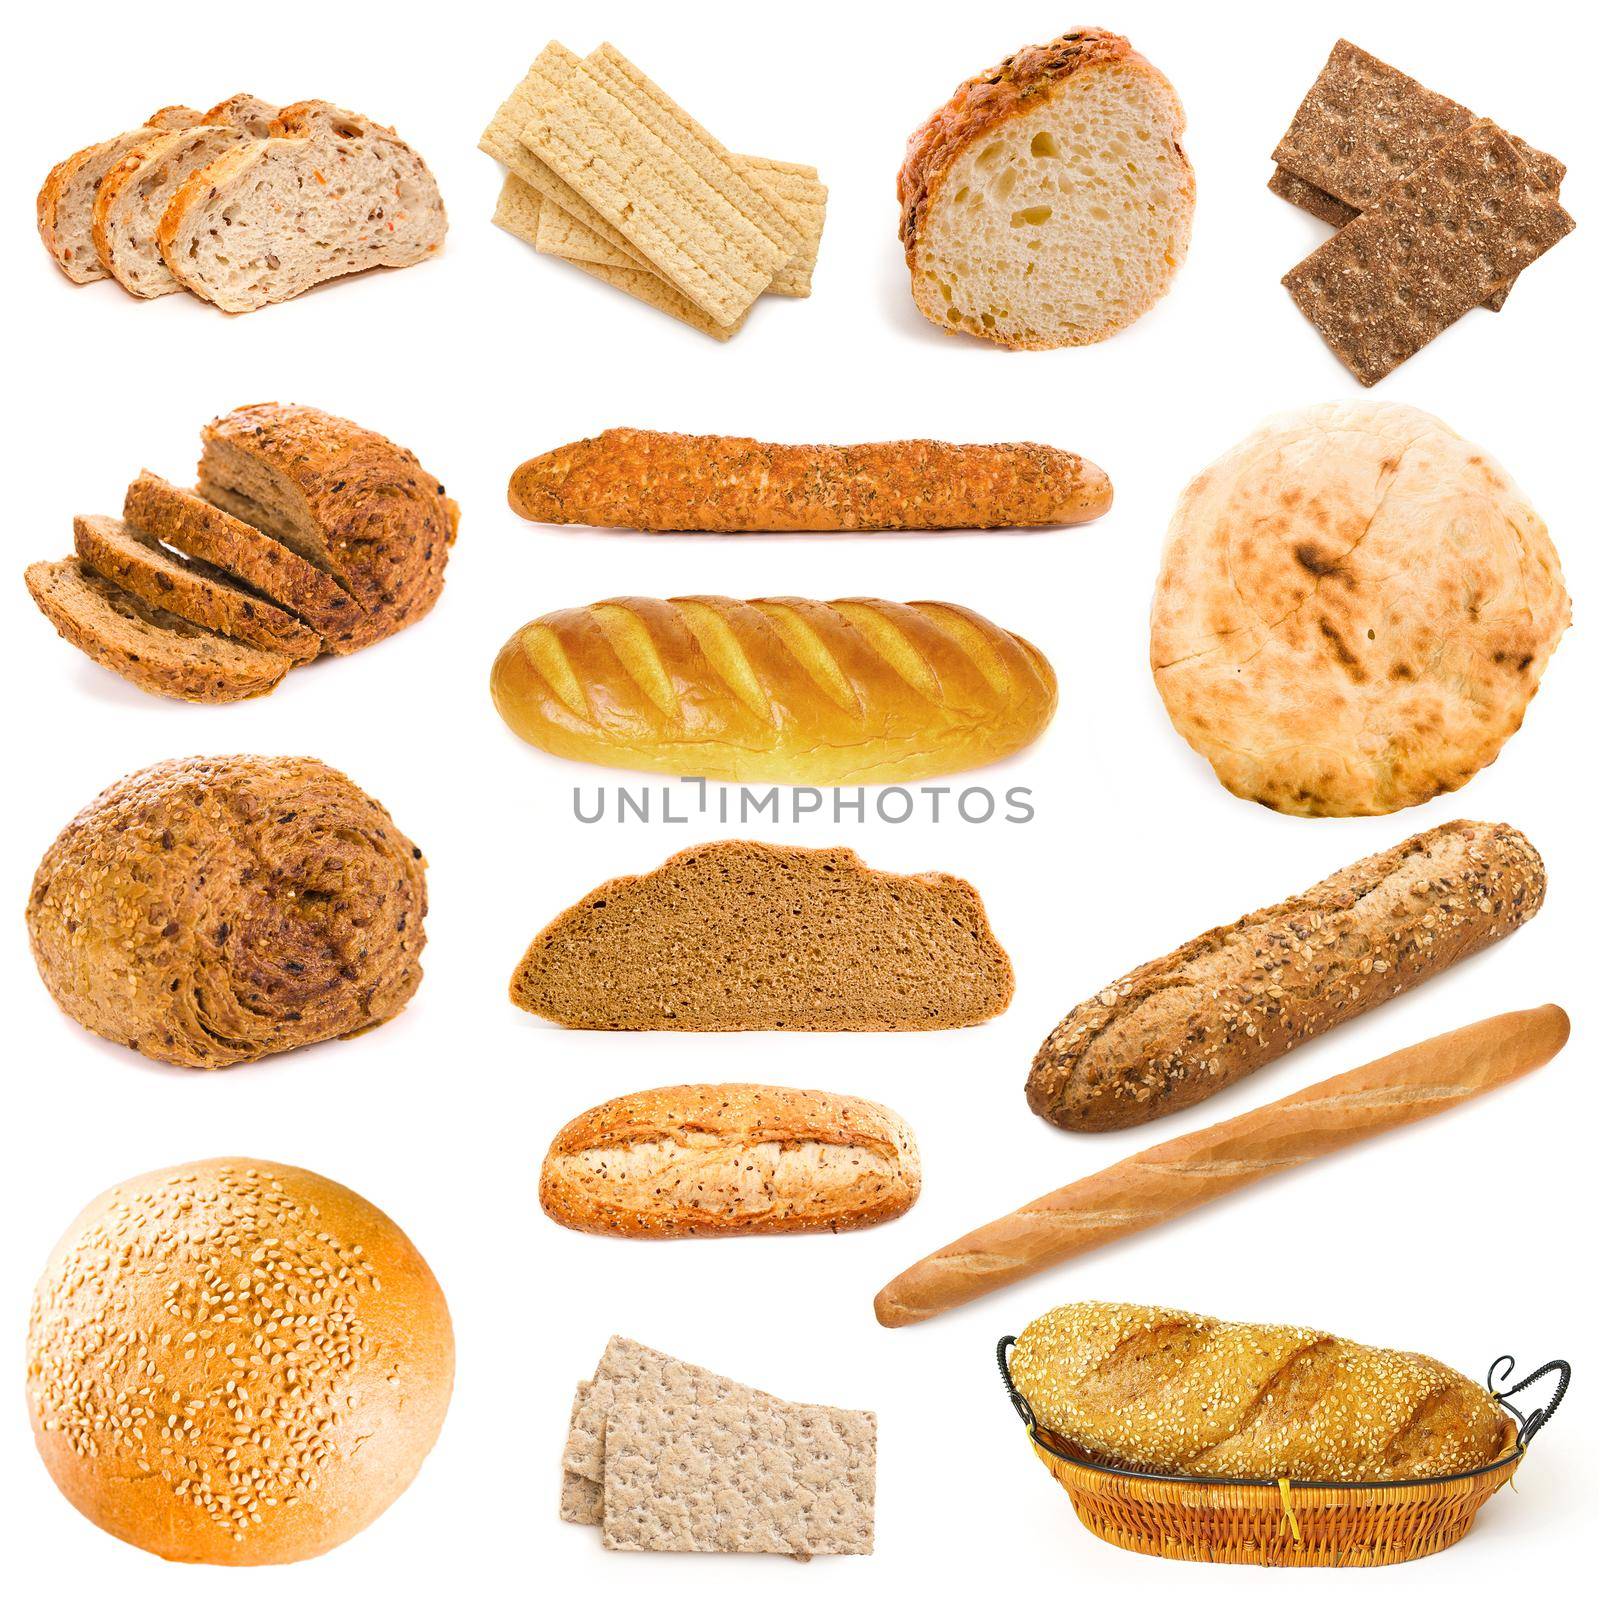 Bread and bakery products isolated on white background